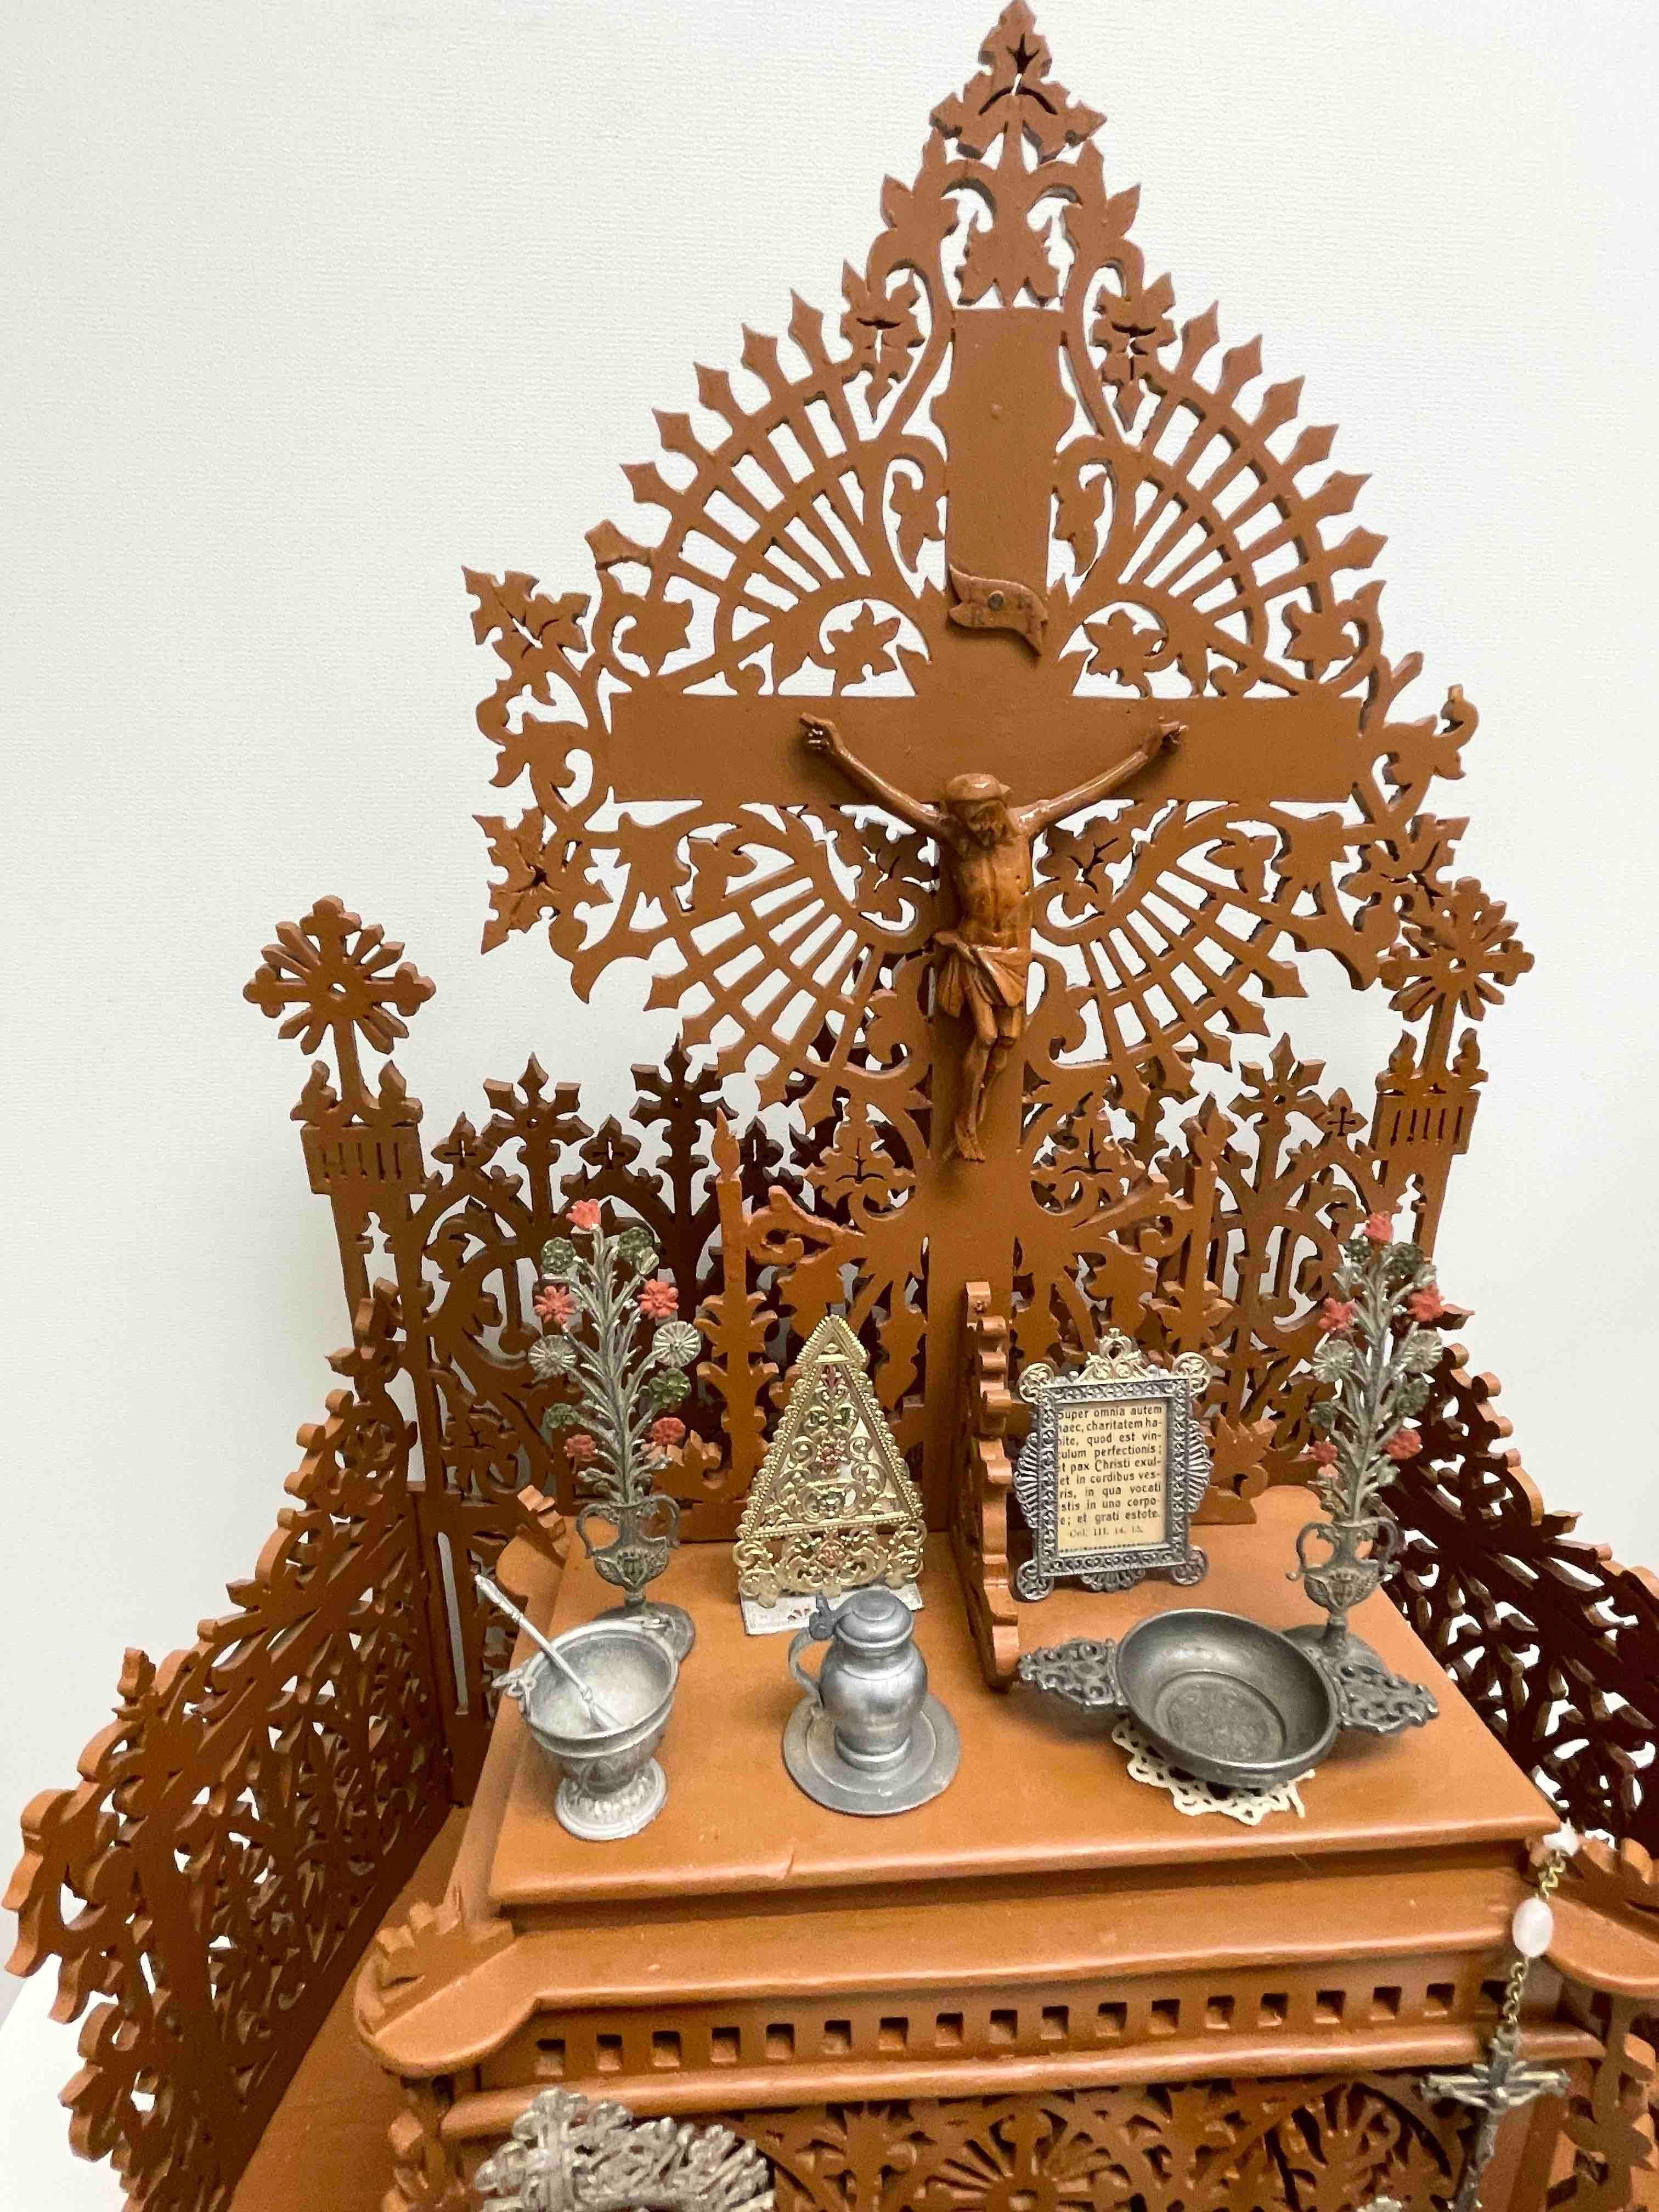 Wood Fretwork House Altar with Accessories Black Forest Folk Art 1900s In Good Condition For Sale In Nuernberg, DE